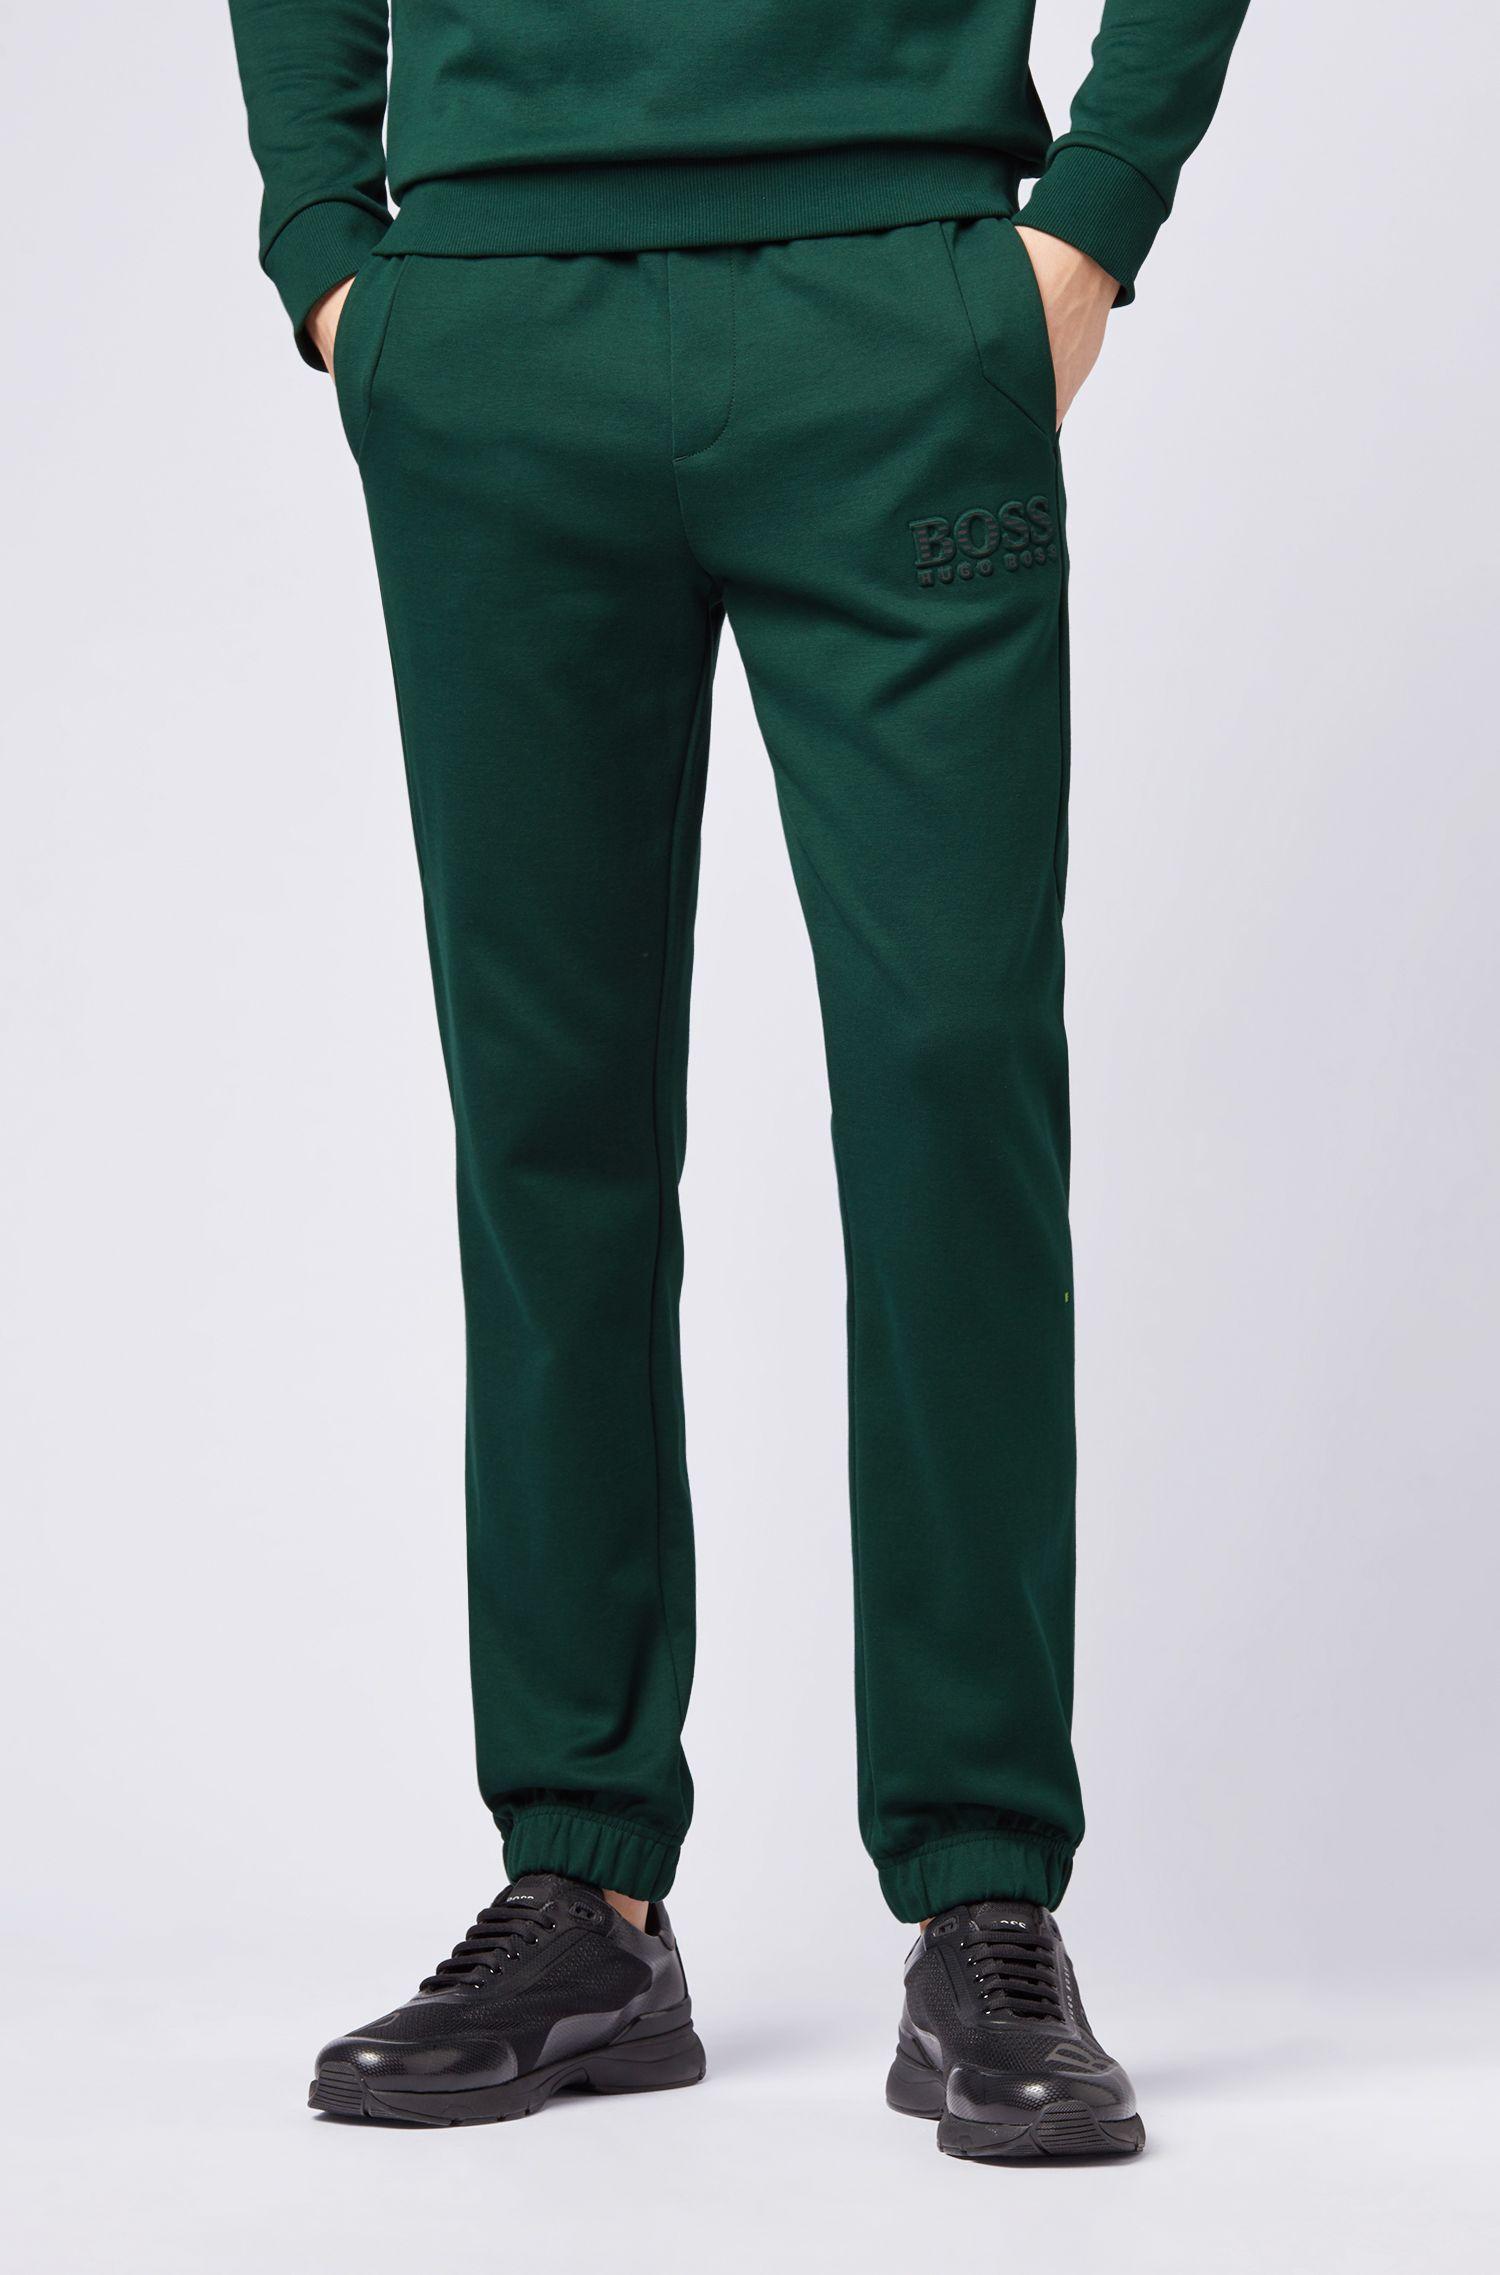 BOSS by Hugo Boss Cotton Slim-fit Tracksuit Bottoms With Reflective  Detailing in Green for Men - Lyst